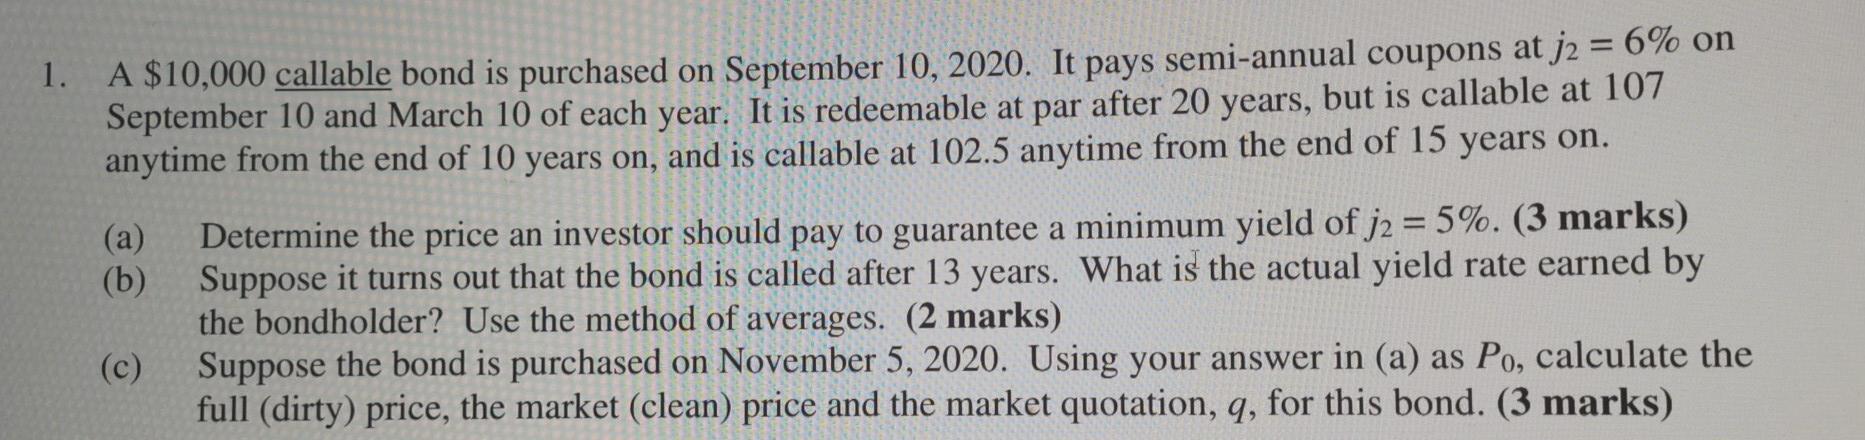 1. A $10,000 callable bond is purchased on September 10, 2020. It pays semi-annual coupons at j2 = 6% onSeptember 10 and Mar